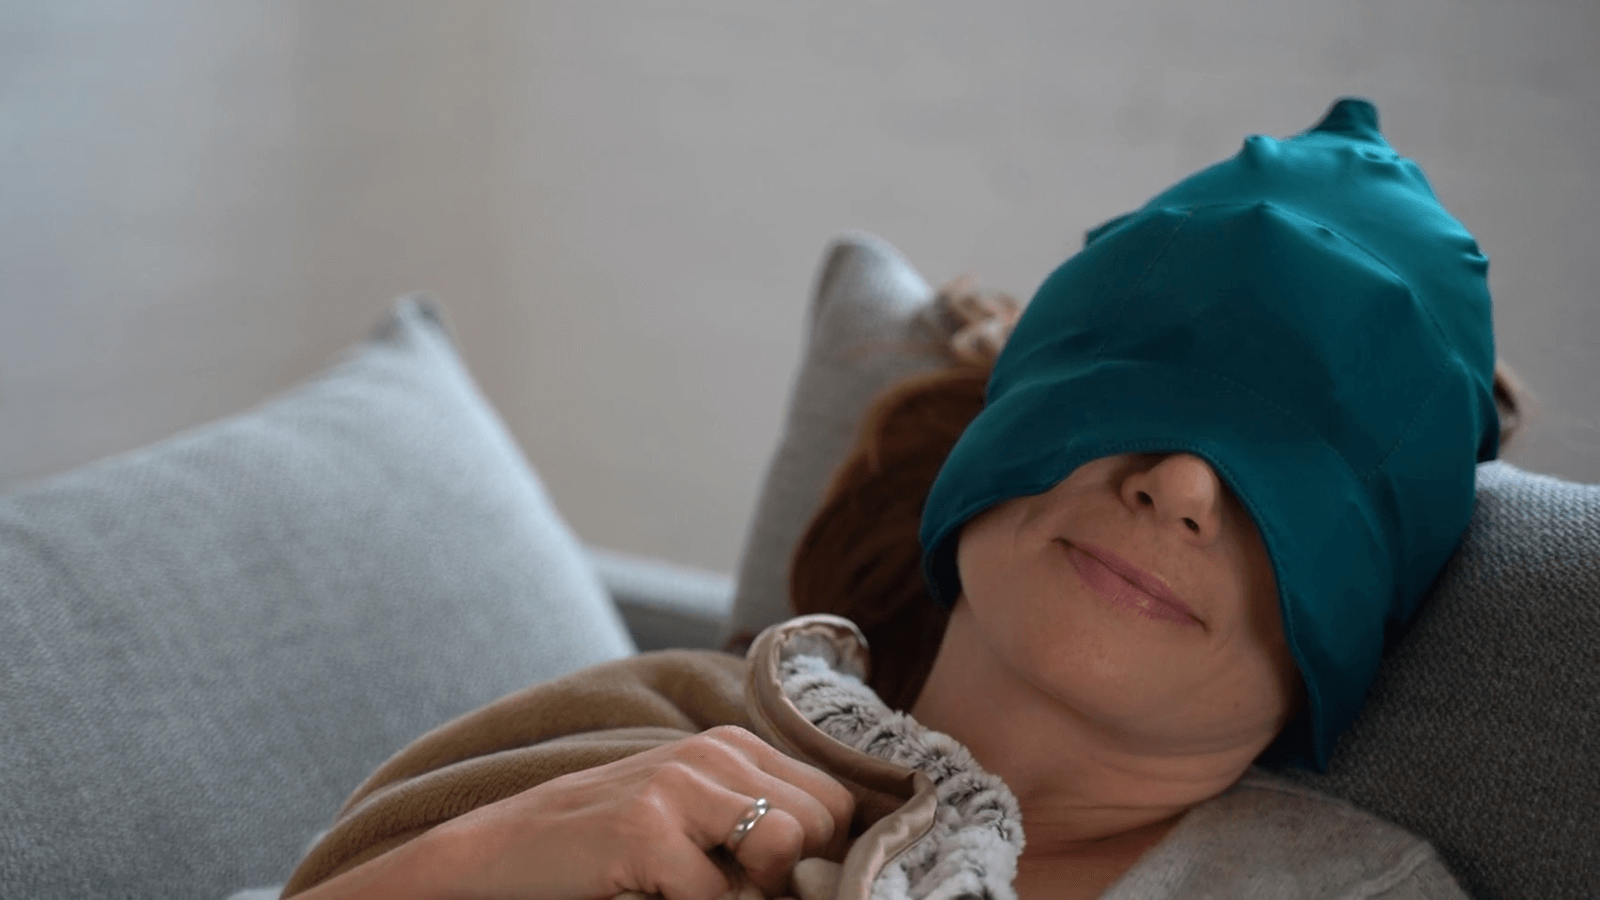 This New Wearable Device Can Provide All Natural Headache & Migraine Relief in Minutes